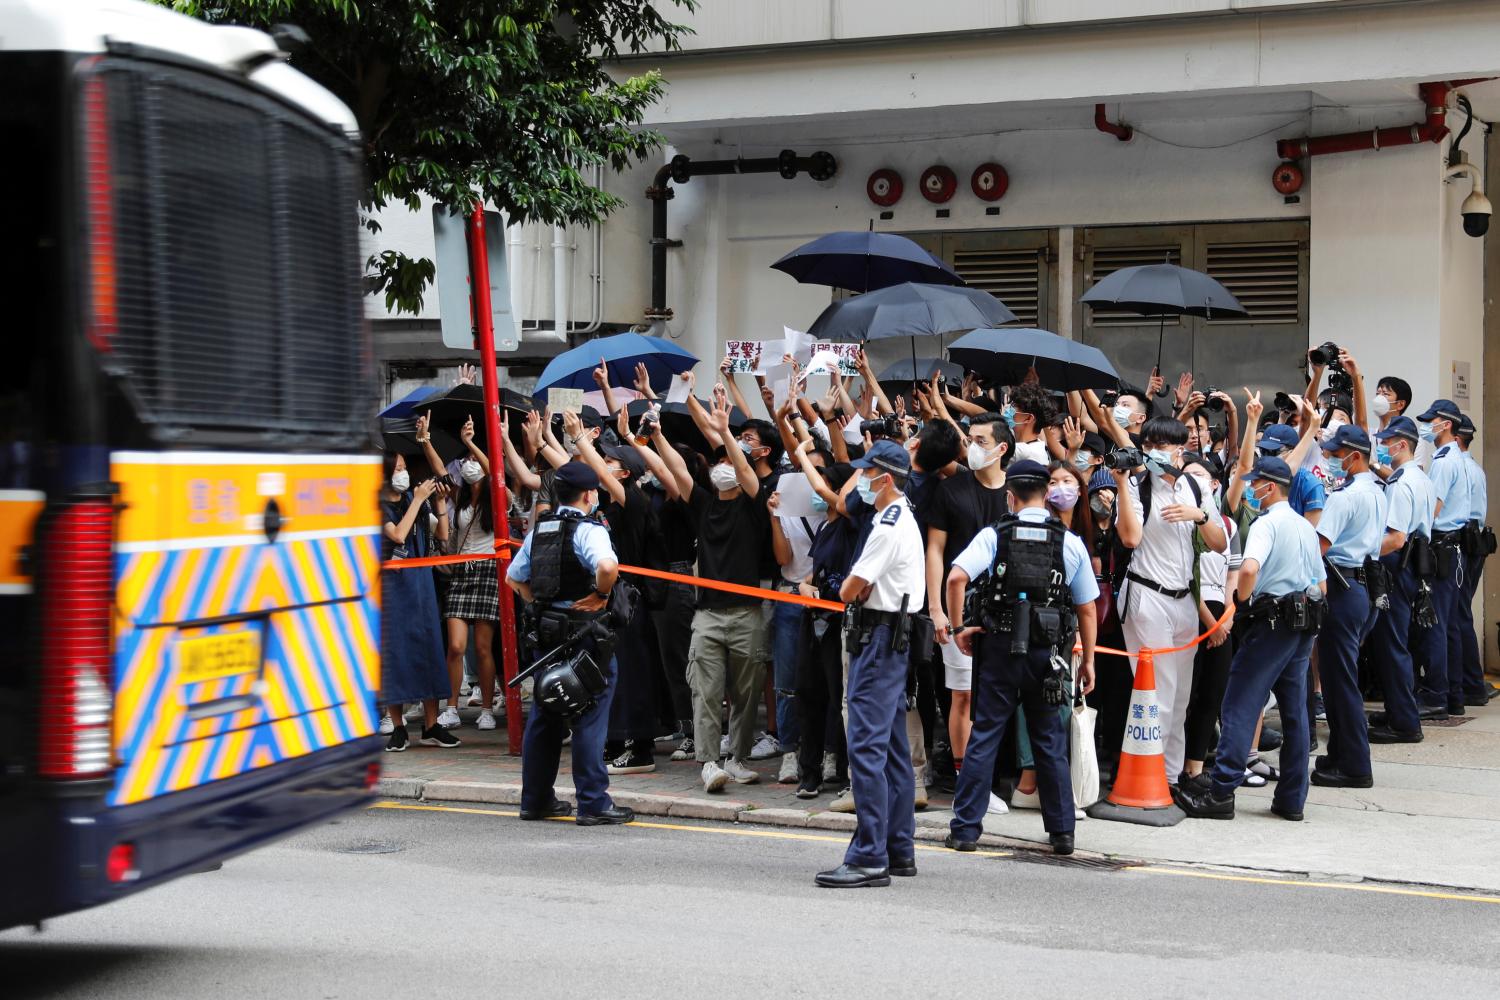 Supporters raise white paper to avoid slogans banned under the national security law as they support arrested anti-law protester, as a prison van leaves Eastern court in Hong Kong, China July 3, 2020. REUTERS/Tyrone Siu